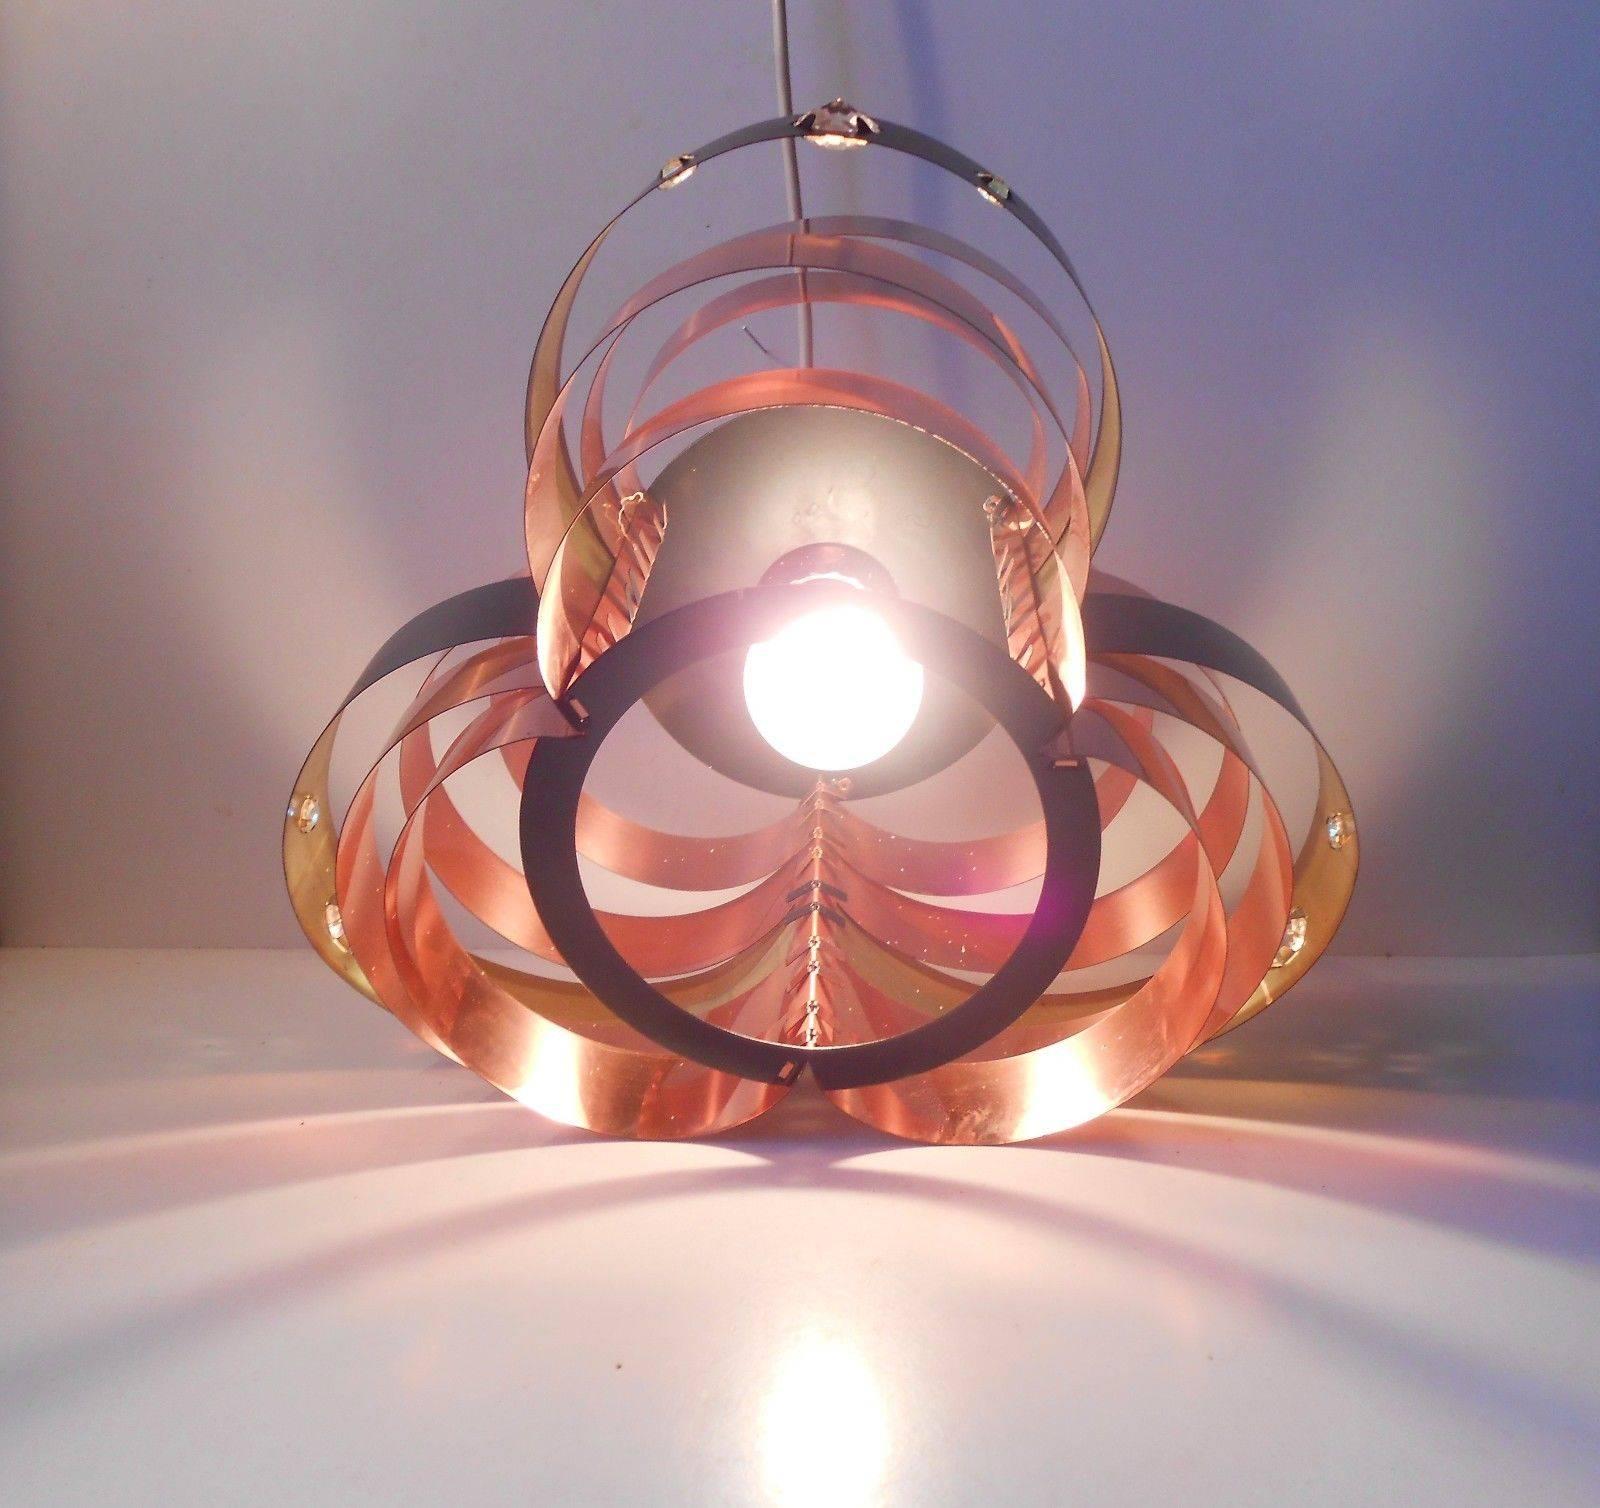 A Danish modern copper and glass chandelier by Verner Schou for Coronell. The model is called P66 - PB1. Measurements: D 14 inches, H 10 inches (35/25 cm).

 